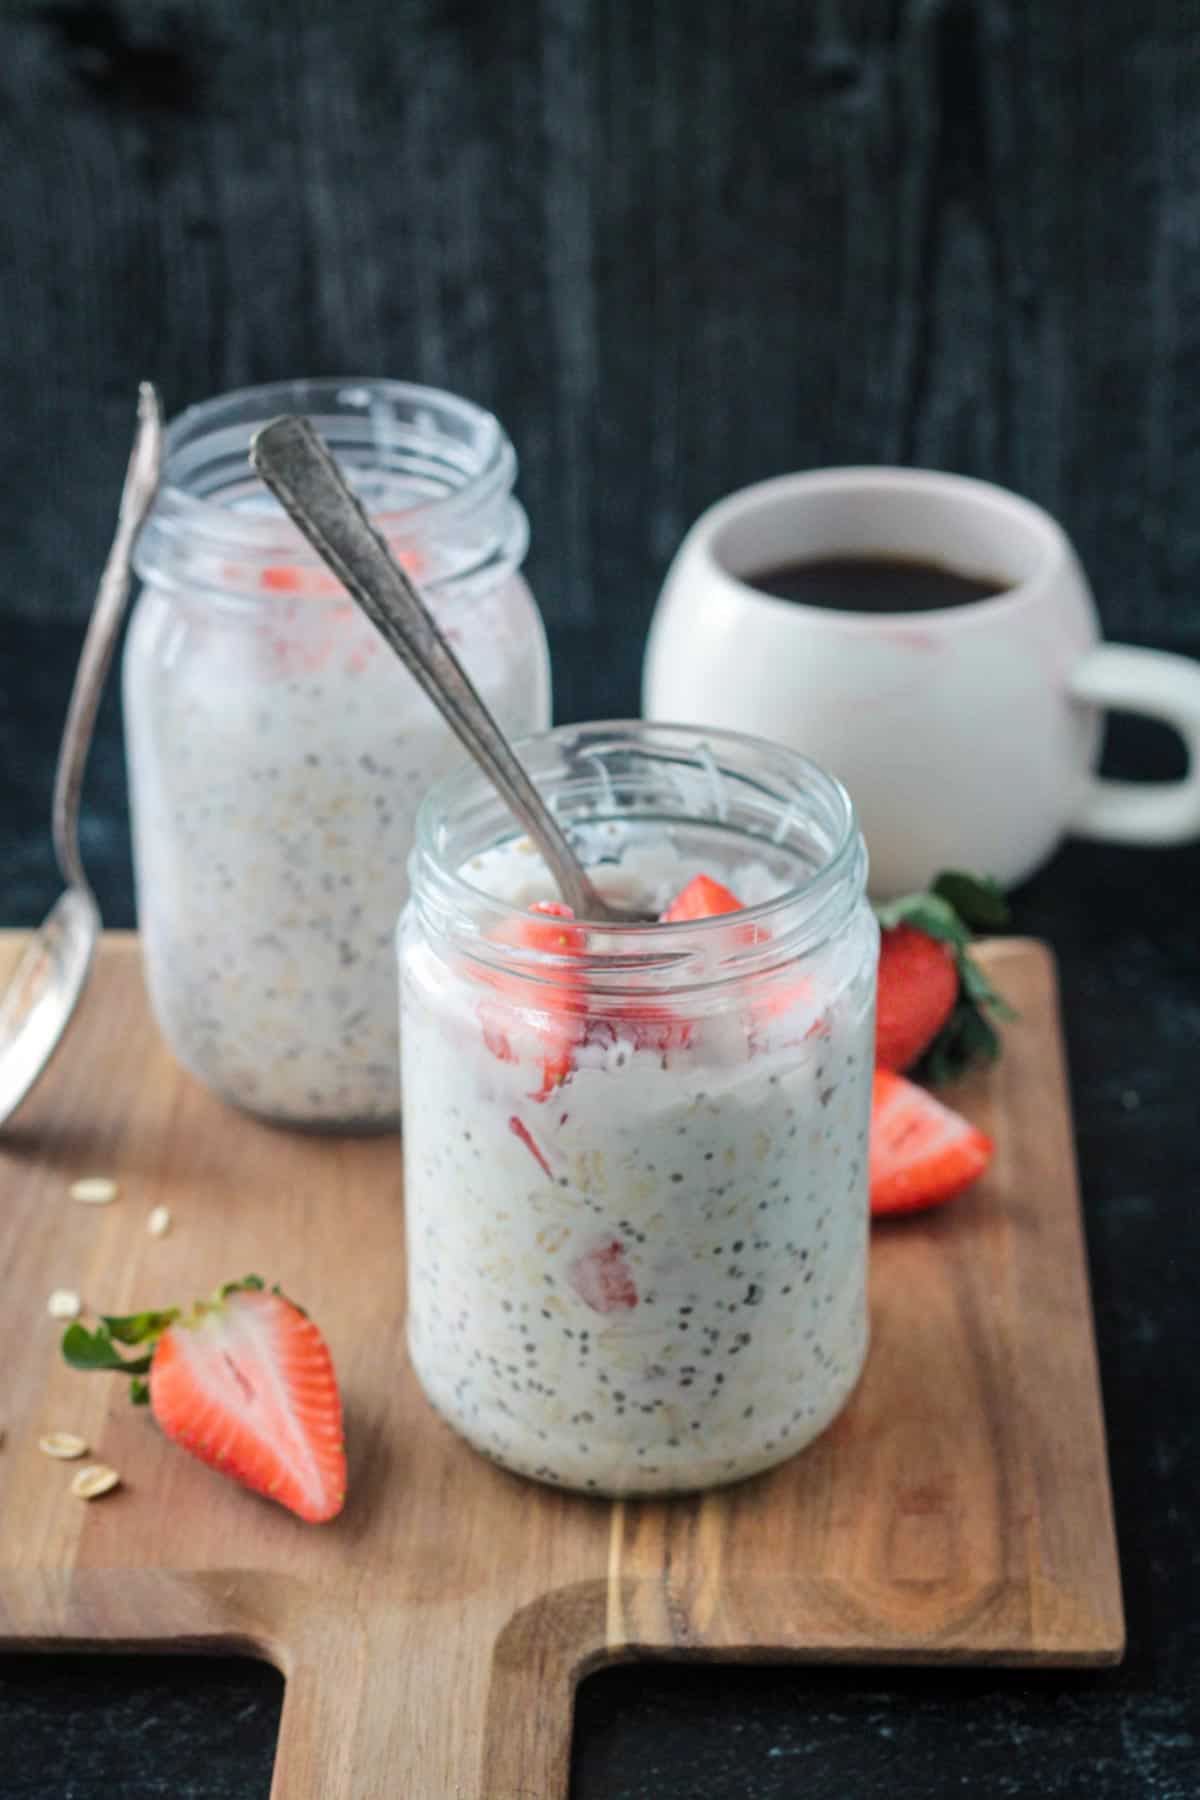 Spoon in a jar of strawberry overnight oats with coconut milk.